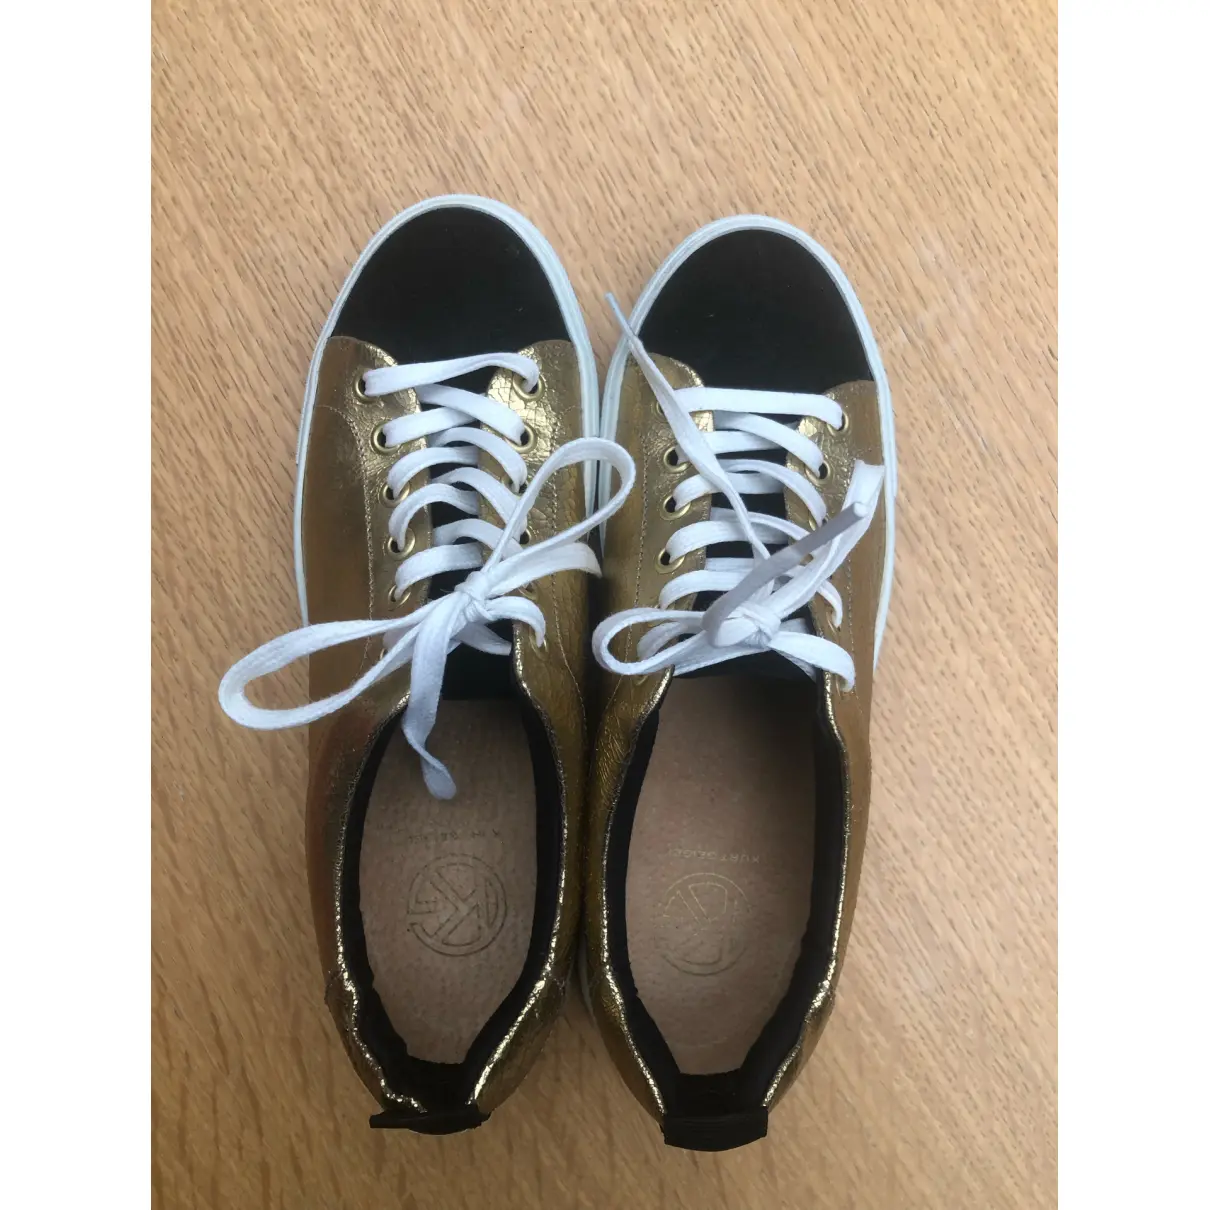 Buy Kurt Geiger Leather trainers online